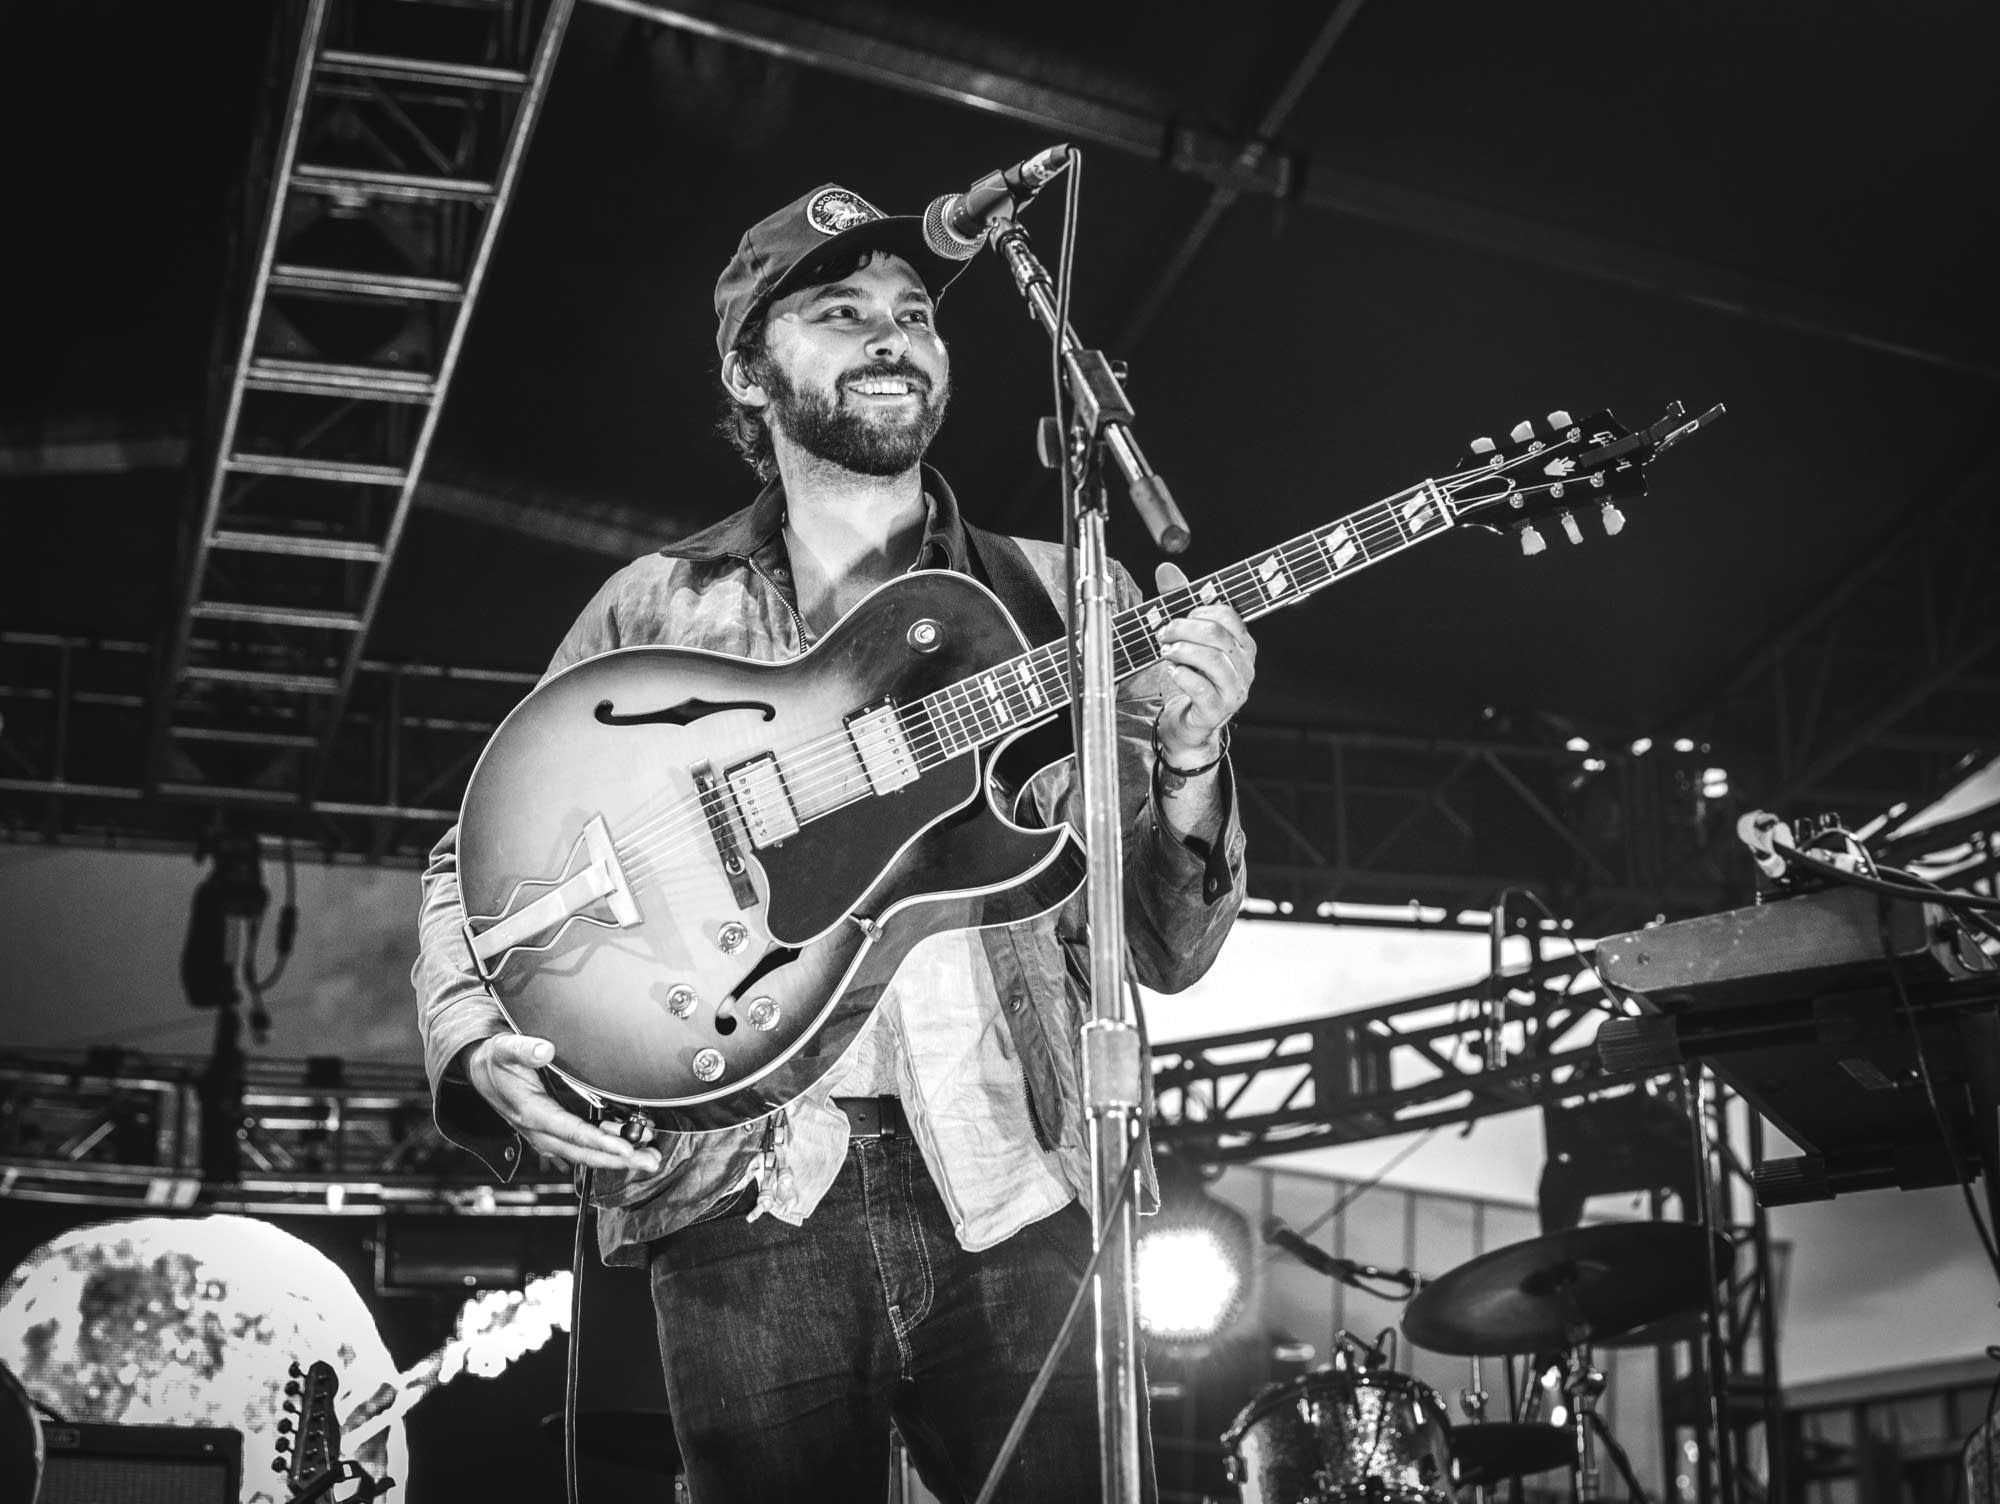 Shakey Graves performs in The Current studio 2000x1510